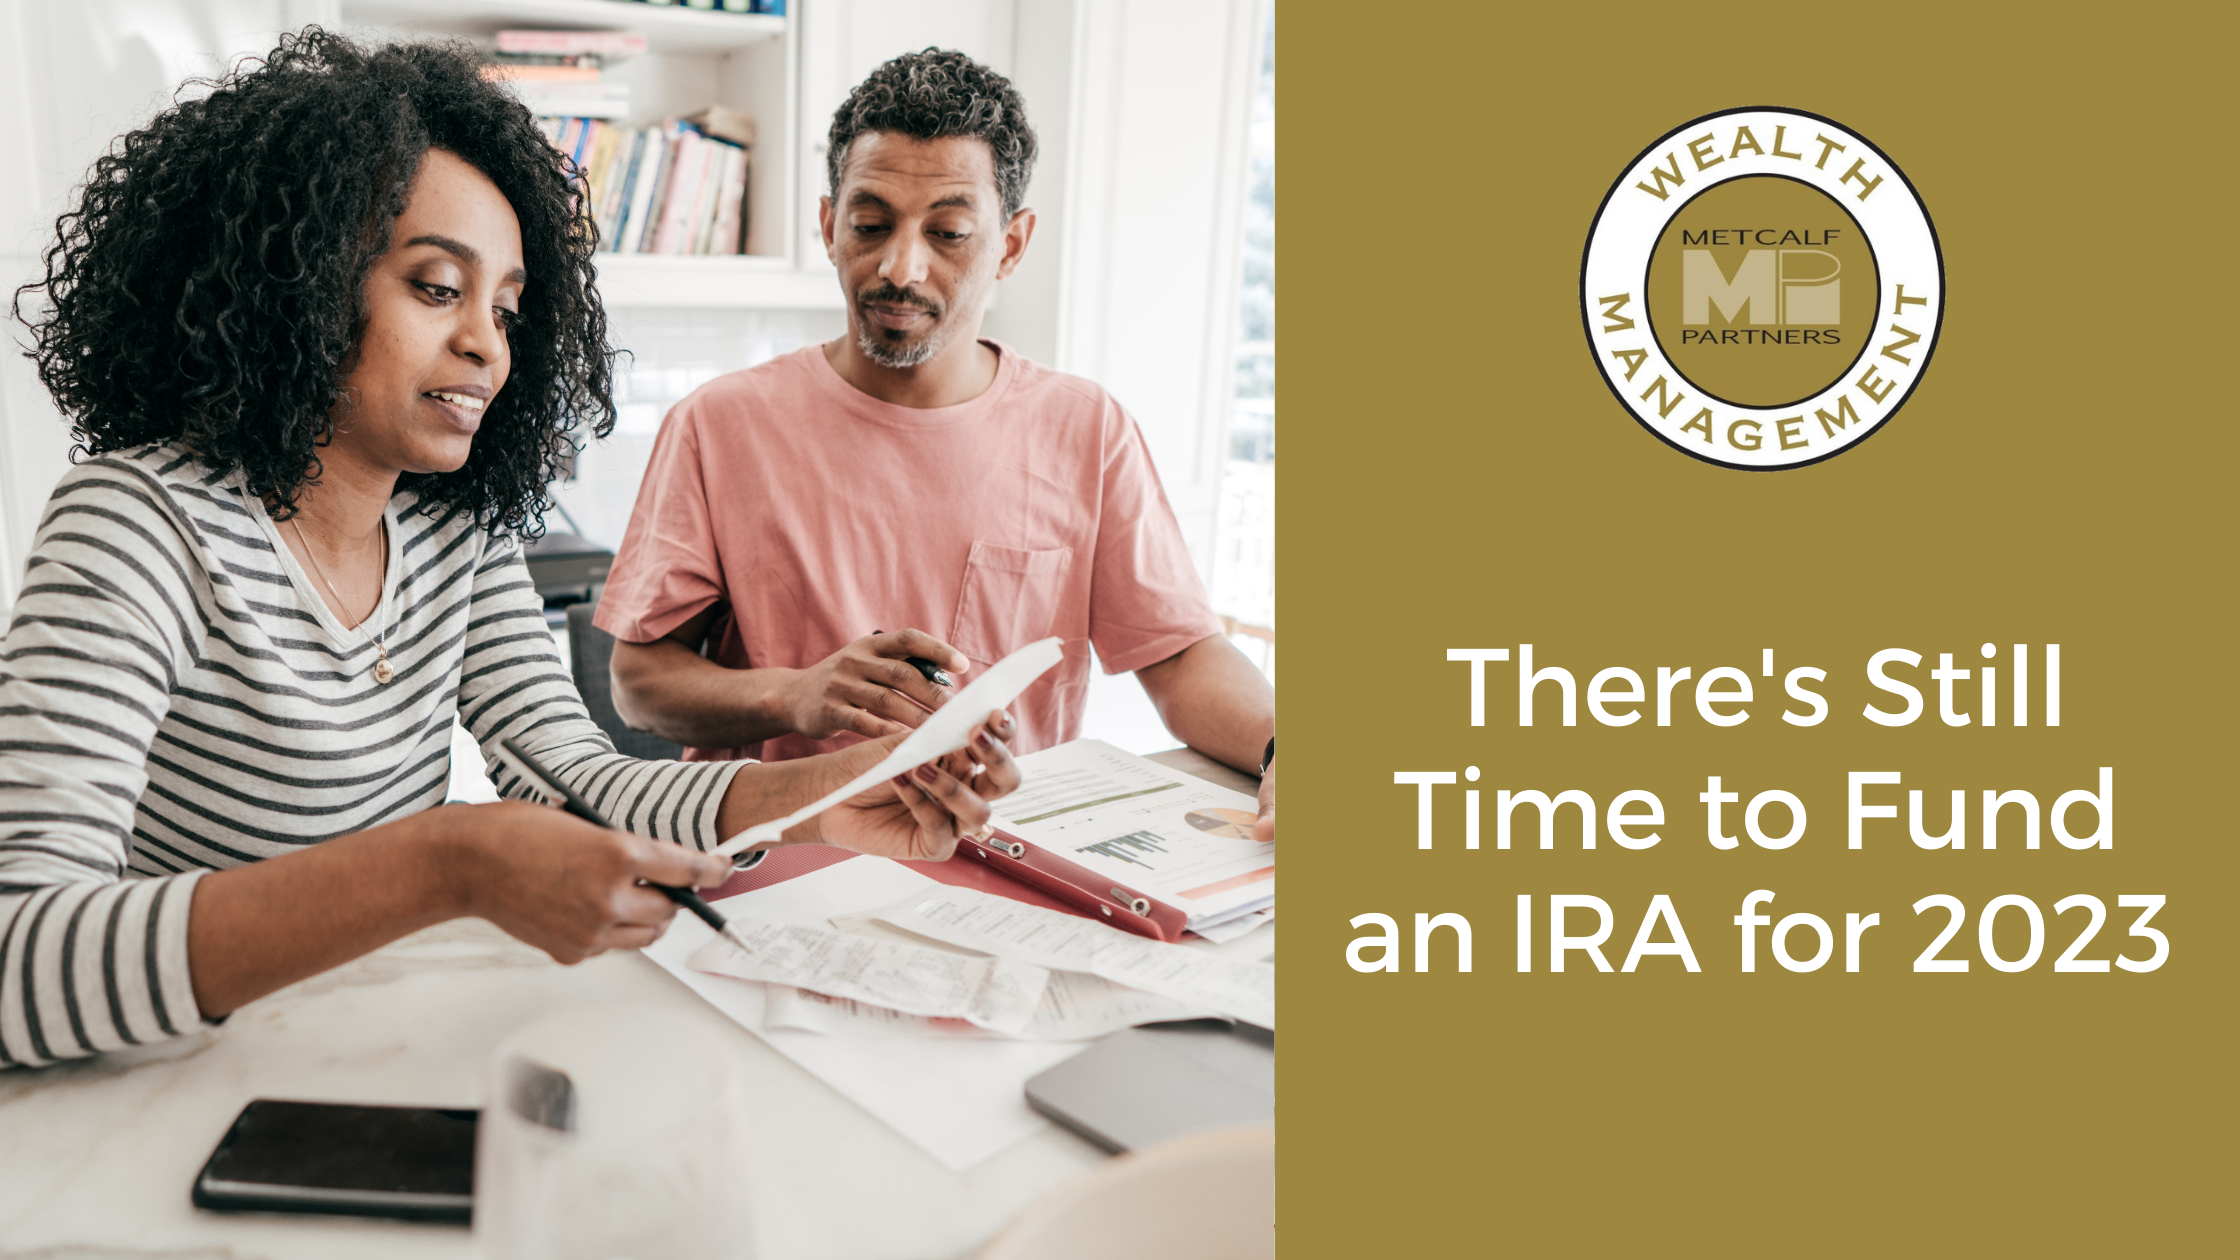 Featured image for “There’s Still Time to Fund an IRA for 2023”